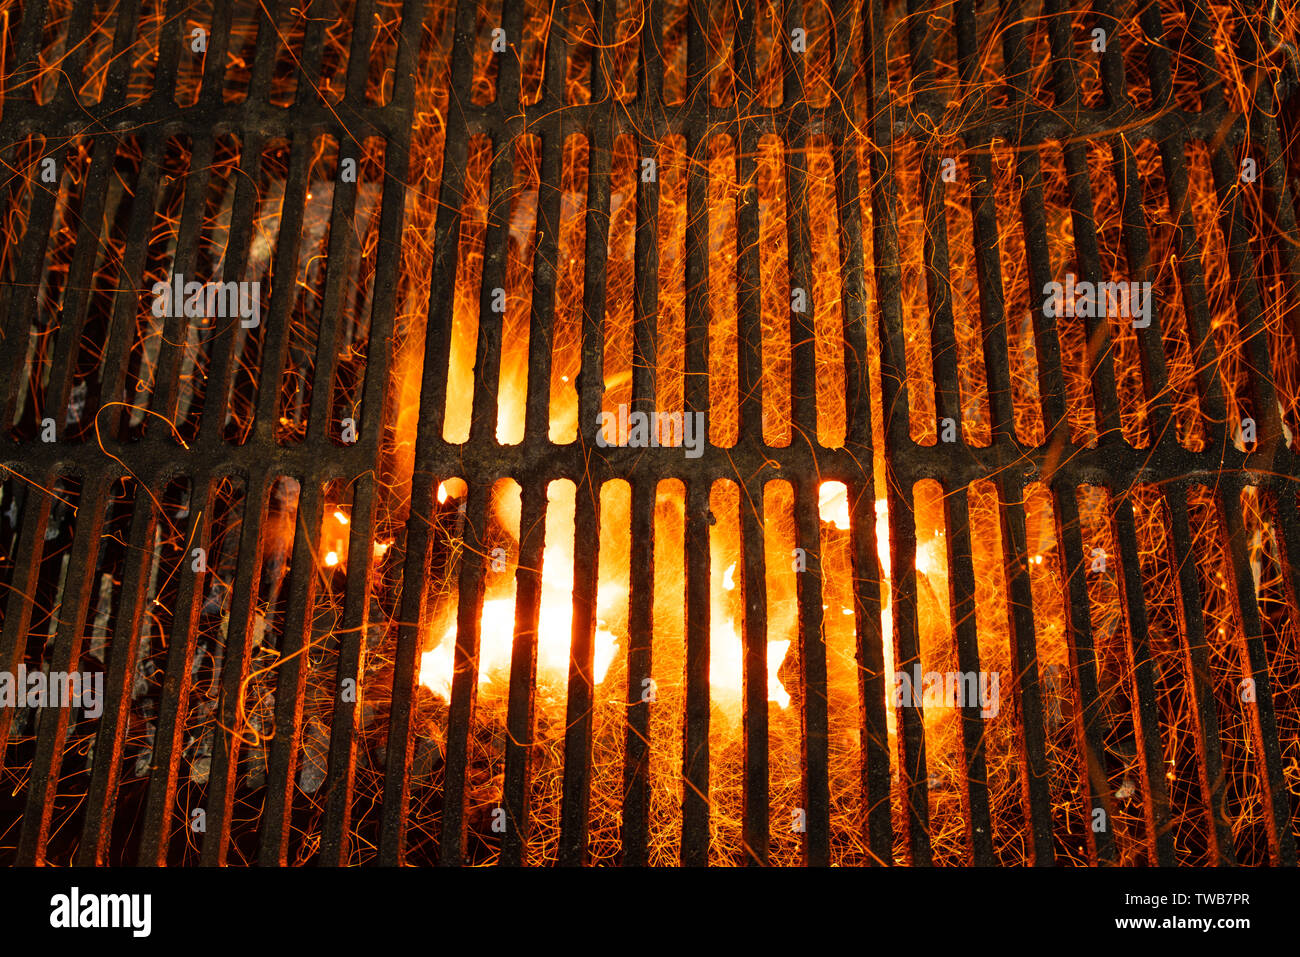 bar-b-cue grill barbecue with red ashes and sparkles in fire Stock Photo